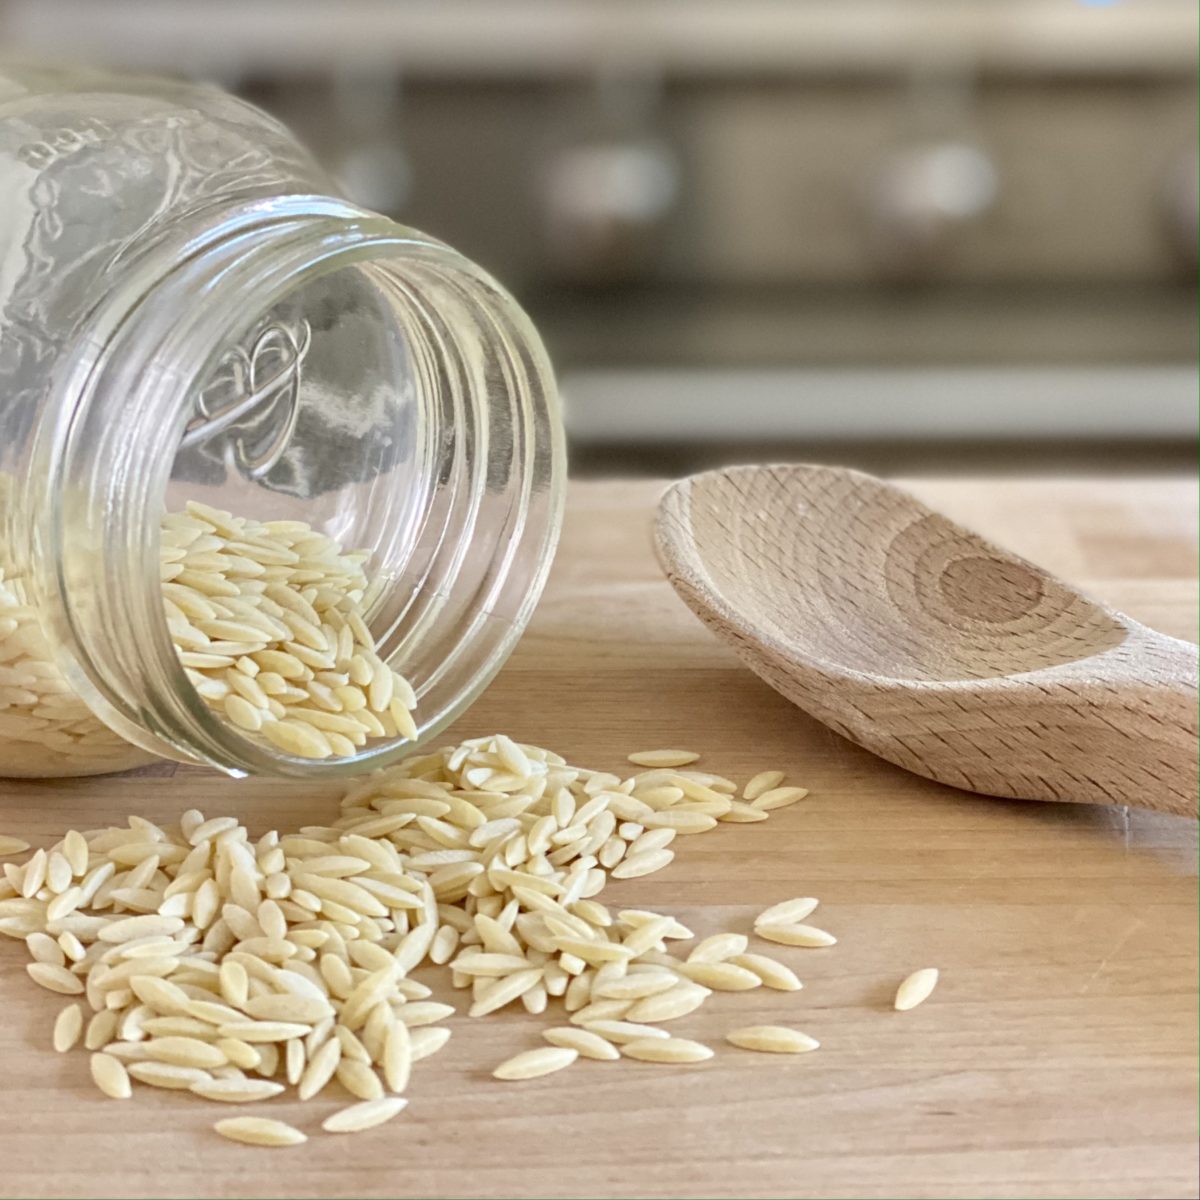 Orzo spilling out of a glass jar with a wooden spoon next to it.